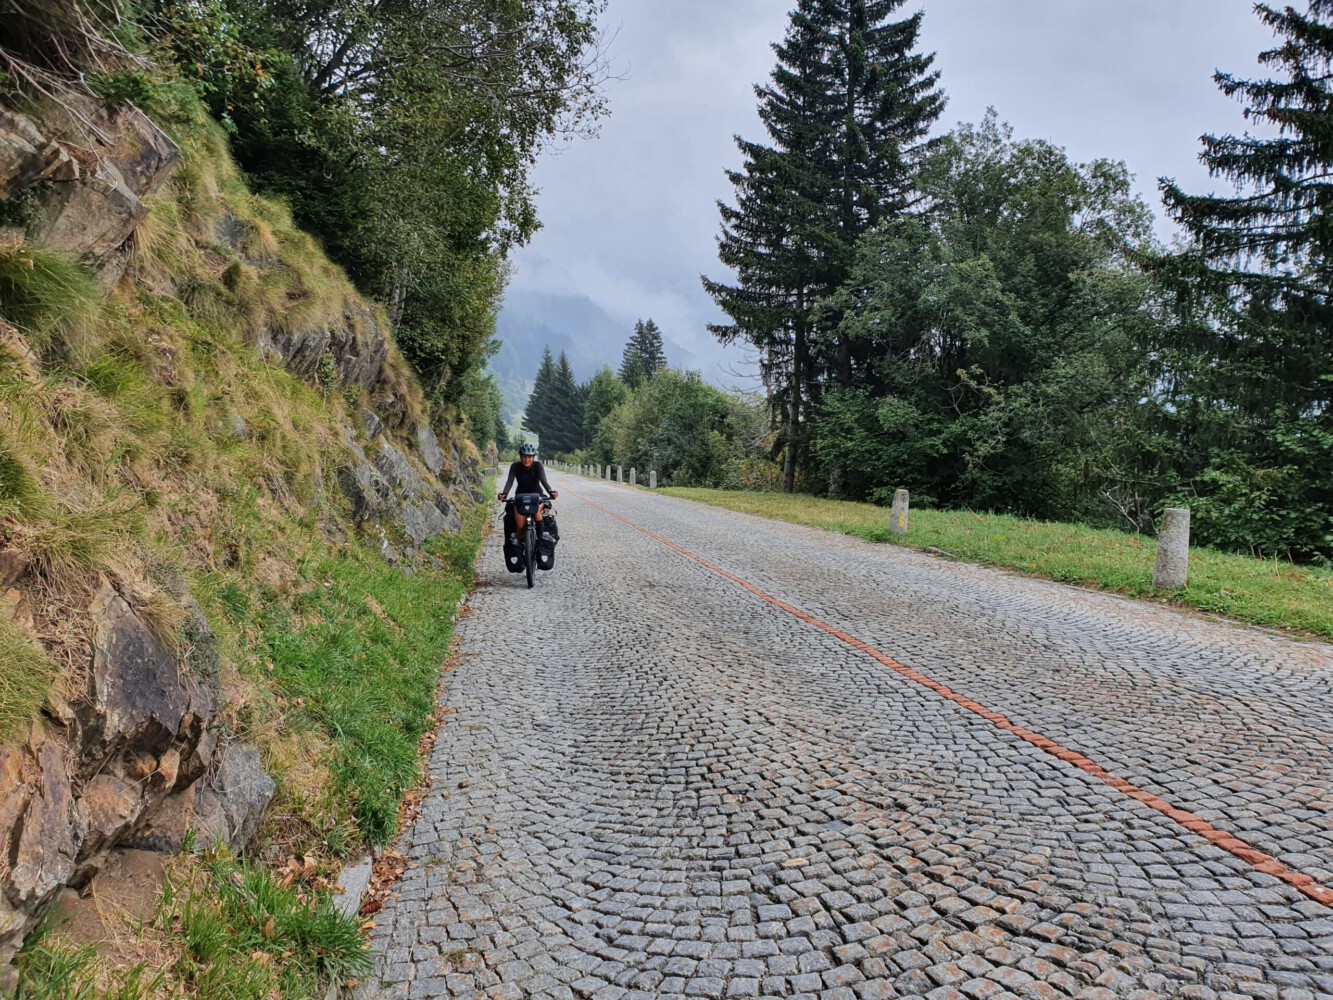 Alina on the first parts of cobblestone.